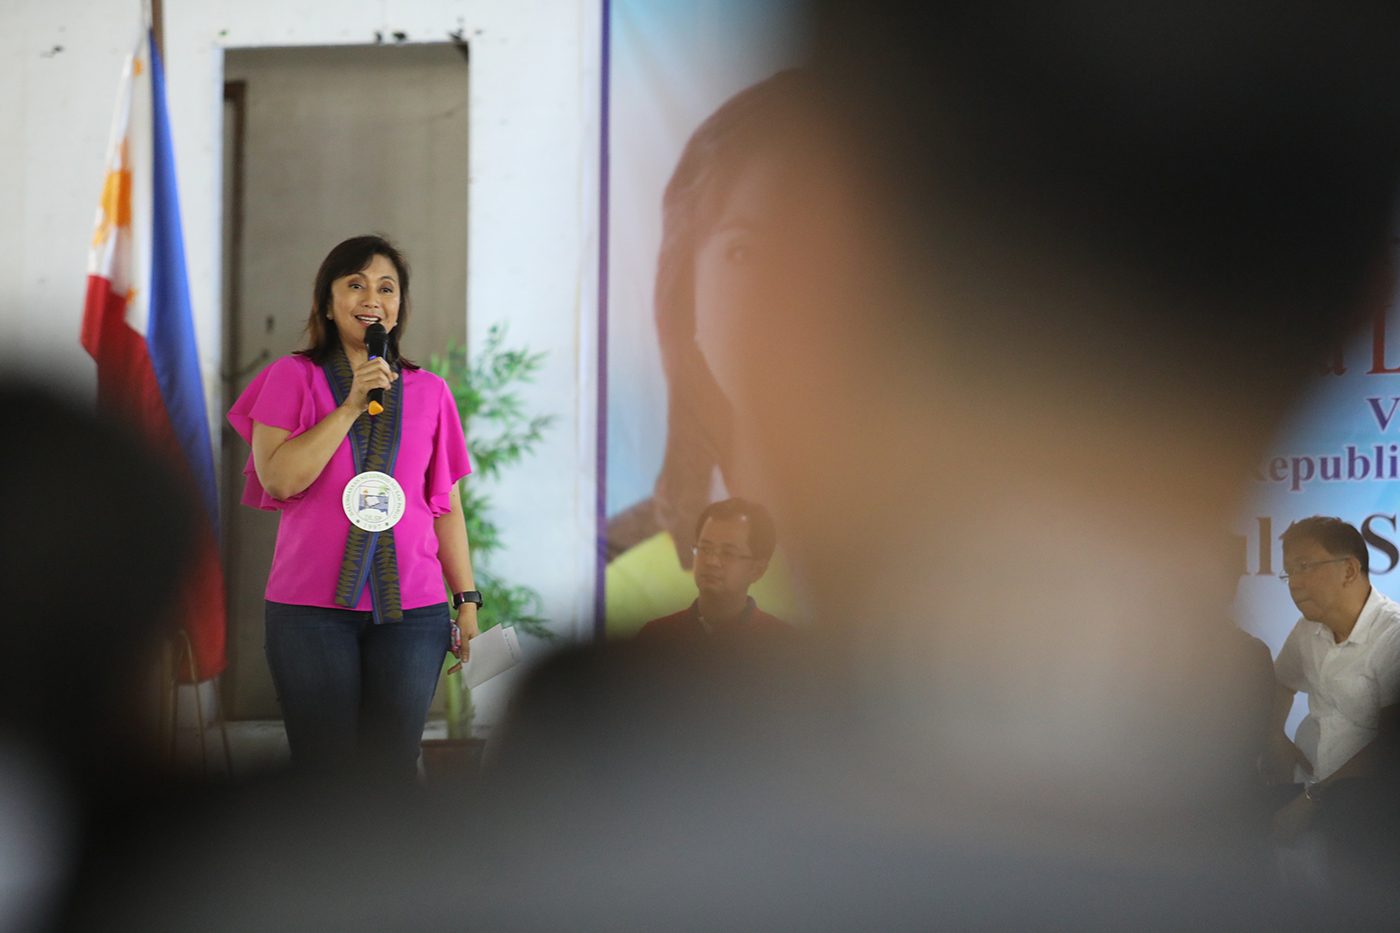 Leni Robredo calls for equality, respect for all ahead of Pride March